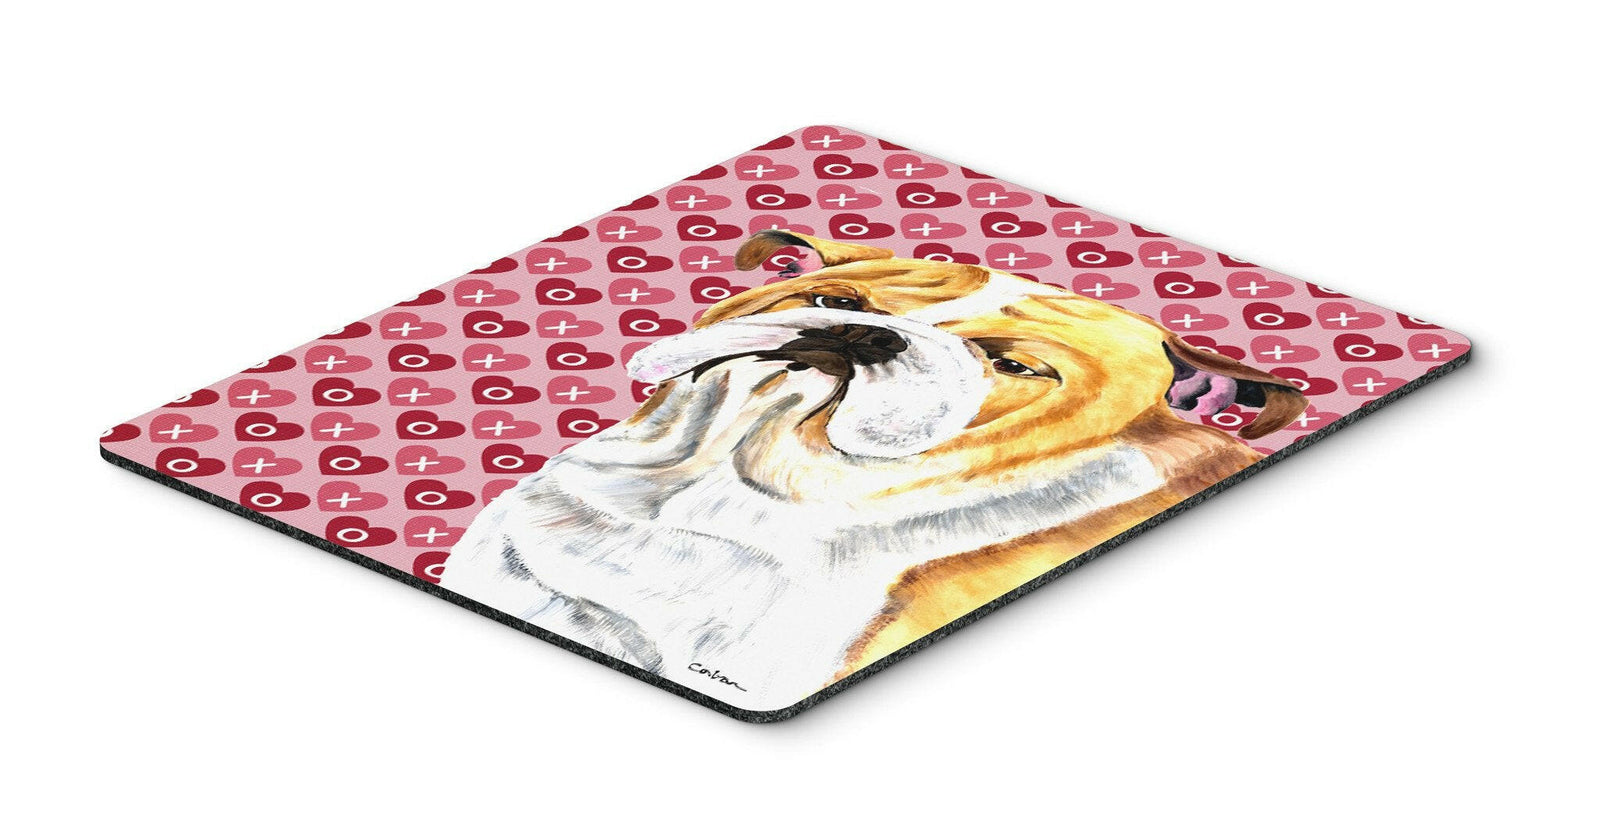 Bulldog English Hearts Love and Valentine's Day Mouse Pad, Hot Pad or Trivet by Caroline's Treasures